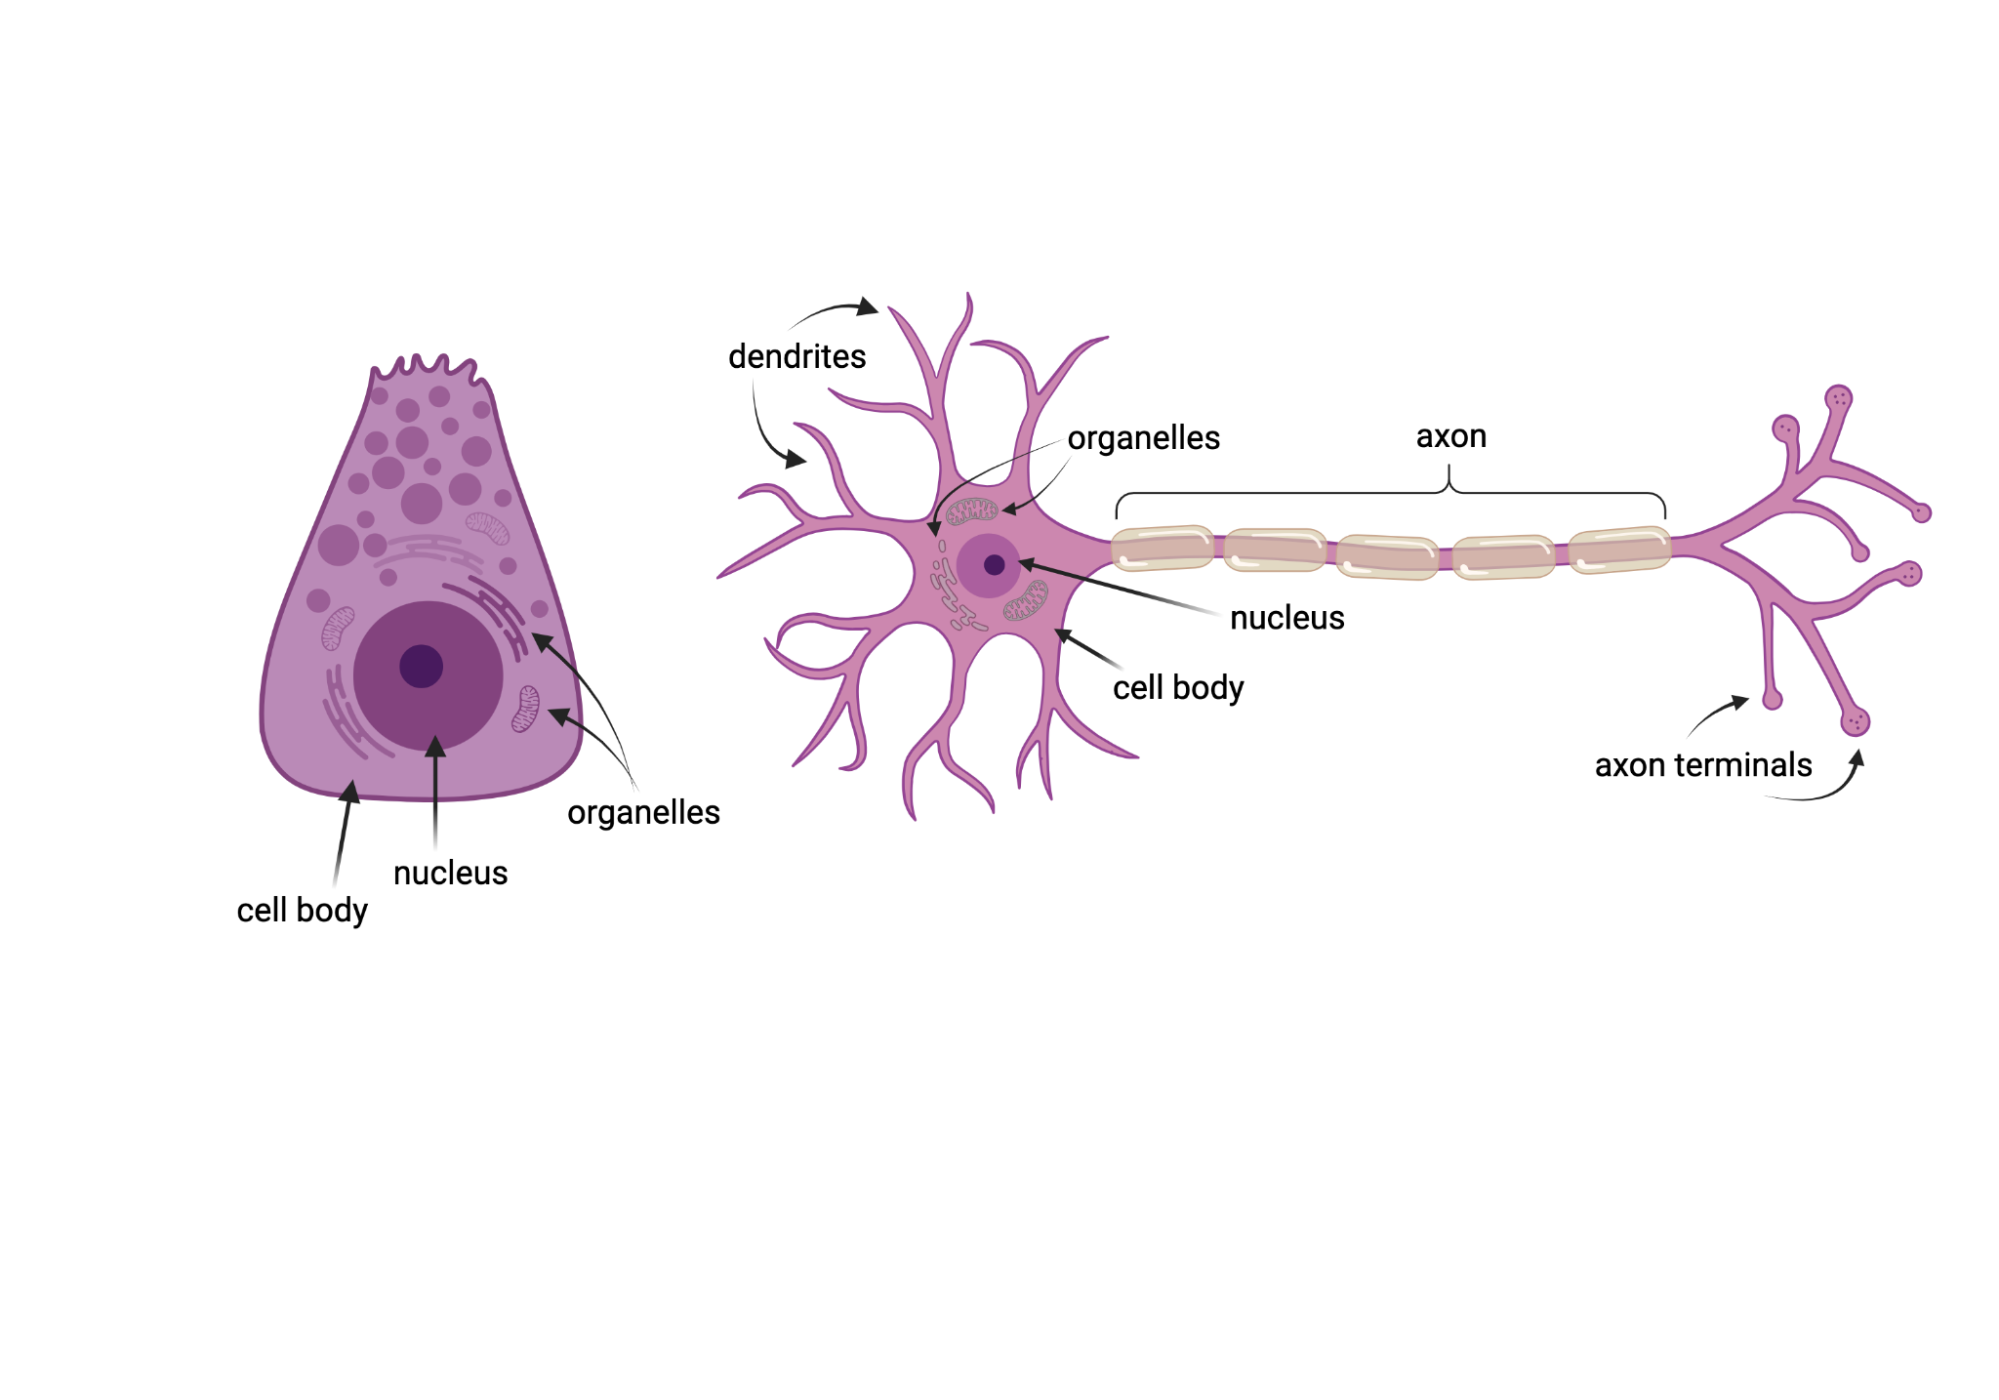 On the left, a pancreatic cell appears with clearly visible organelles and nucleus. It has a boxy shape. On the right, a standard neuron is shown also containing organelles and nucleus, but featuring dentures, an axon, and axon terminals as long spindly extensions.